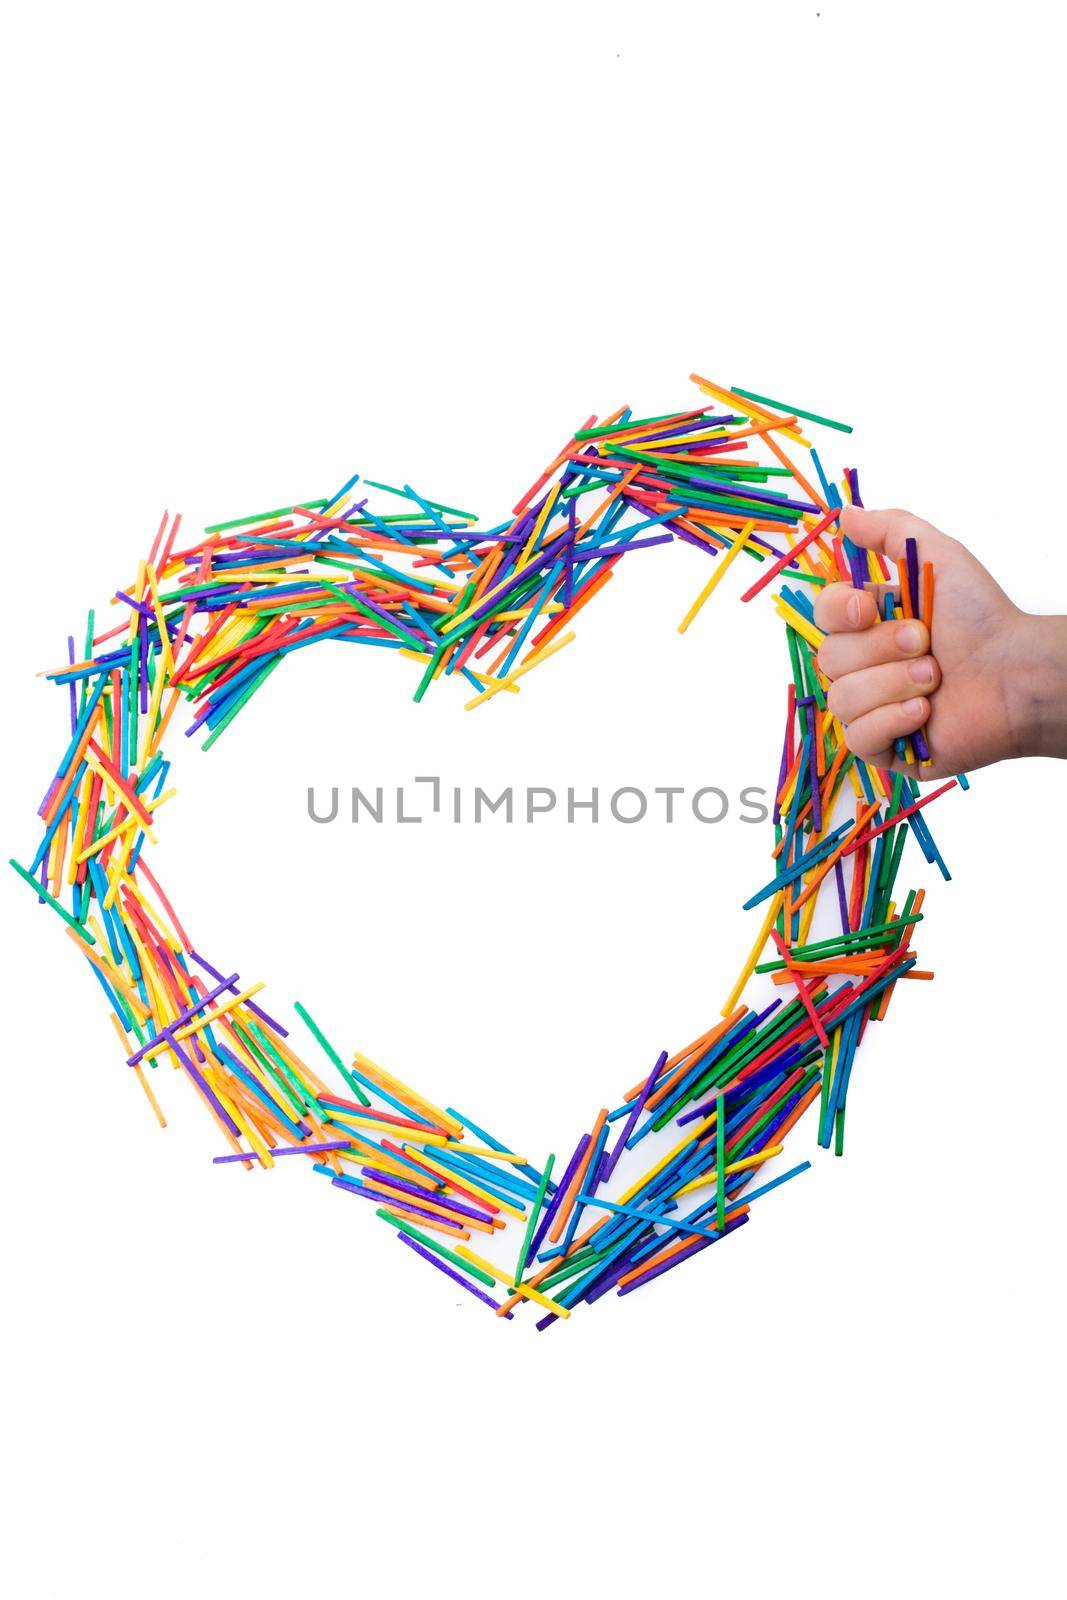 Coloured sticks formed heart shape by hand on white background